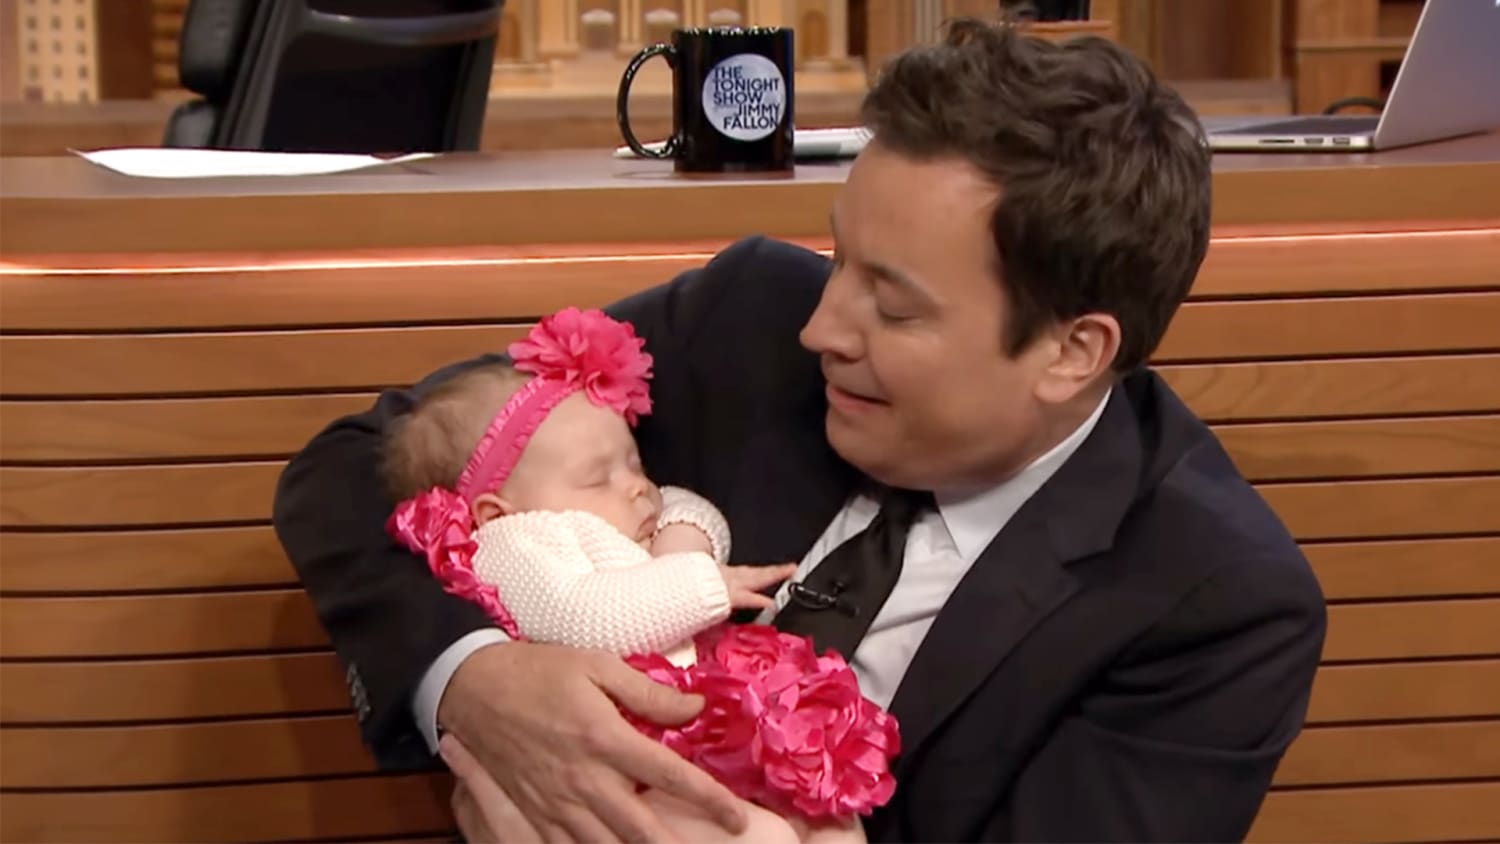 Ice-T's sleeping baby Chanel turns Jimmy Fallon into a puddle of mush